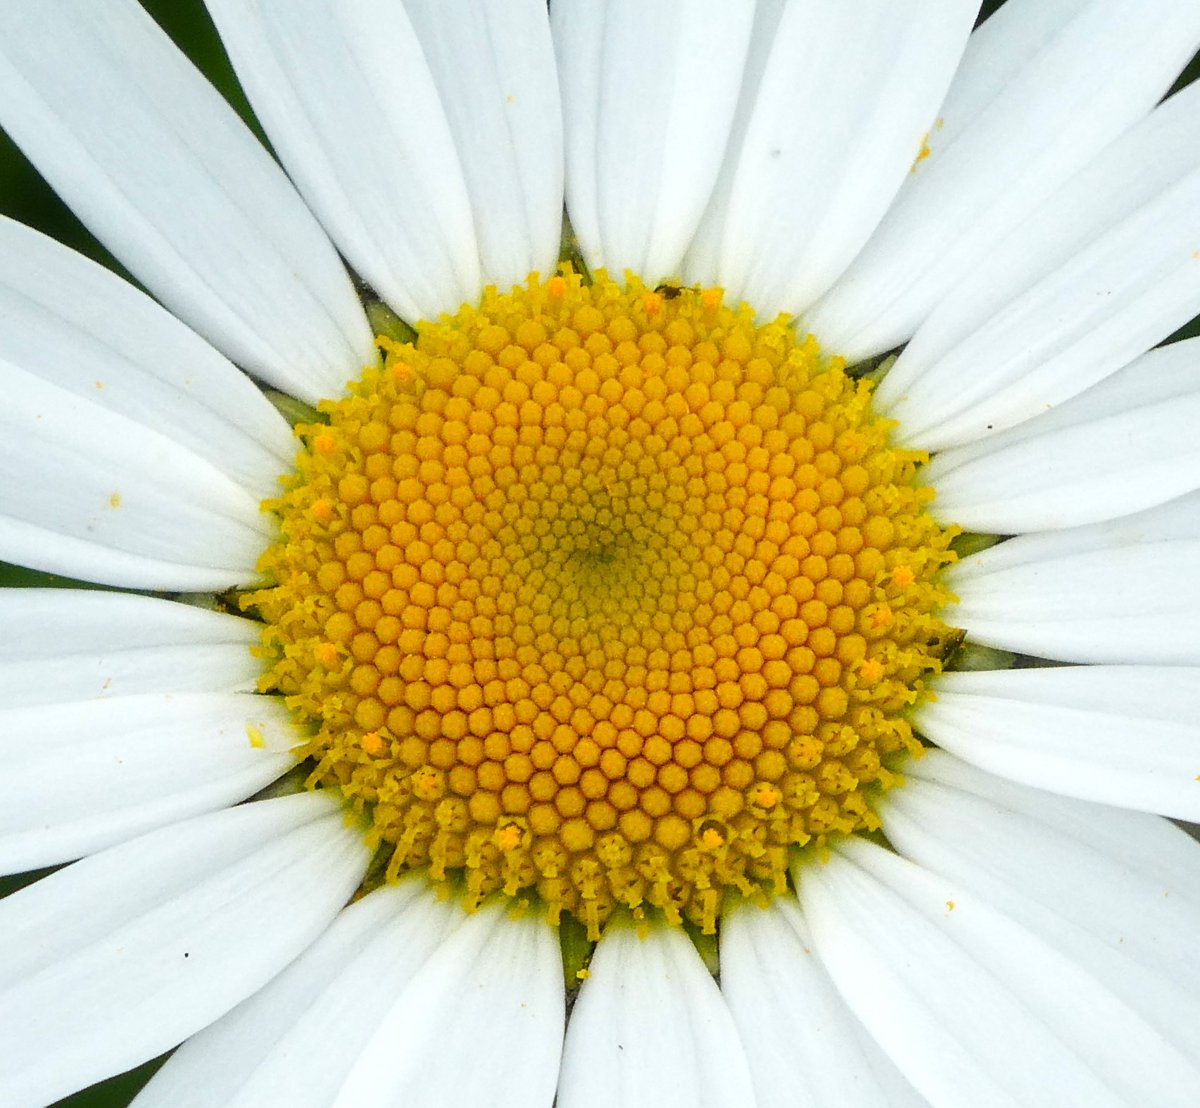 Fibonacci spiral at the heart of a ox-eye daisy🌼 Daisy comes from Old English 'dæges éage' - 'day's eye' - describing how the sun-disk at its centre is concealed in the evening & the white ray florets open to reveal it in the morning☀️